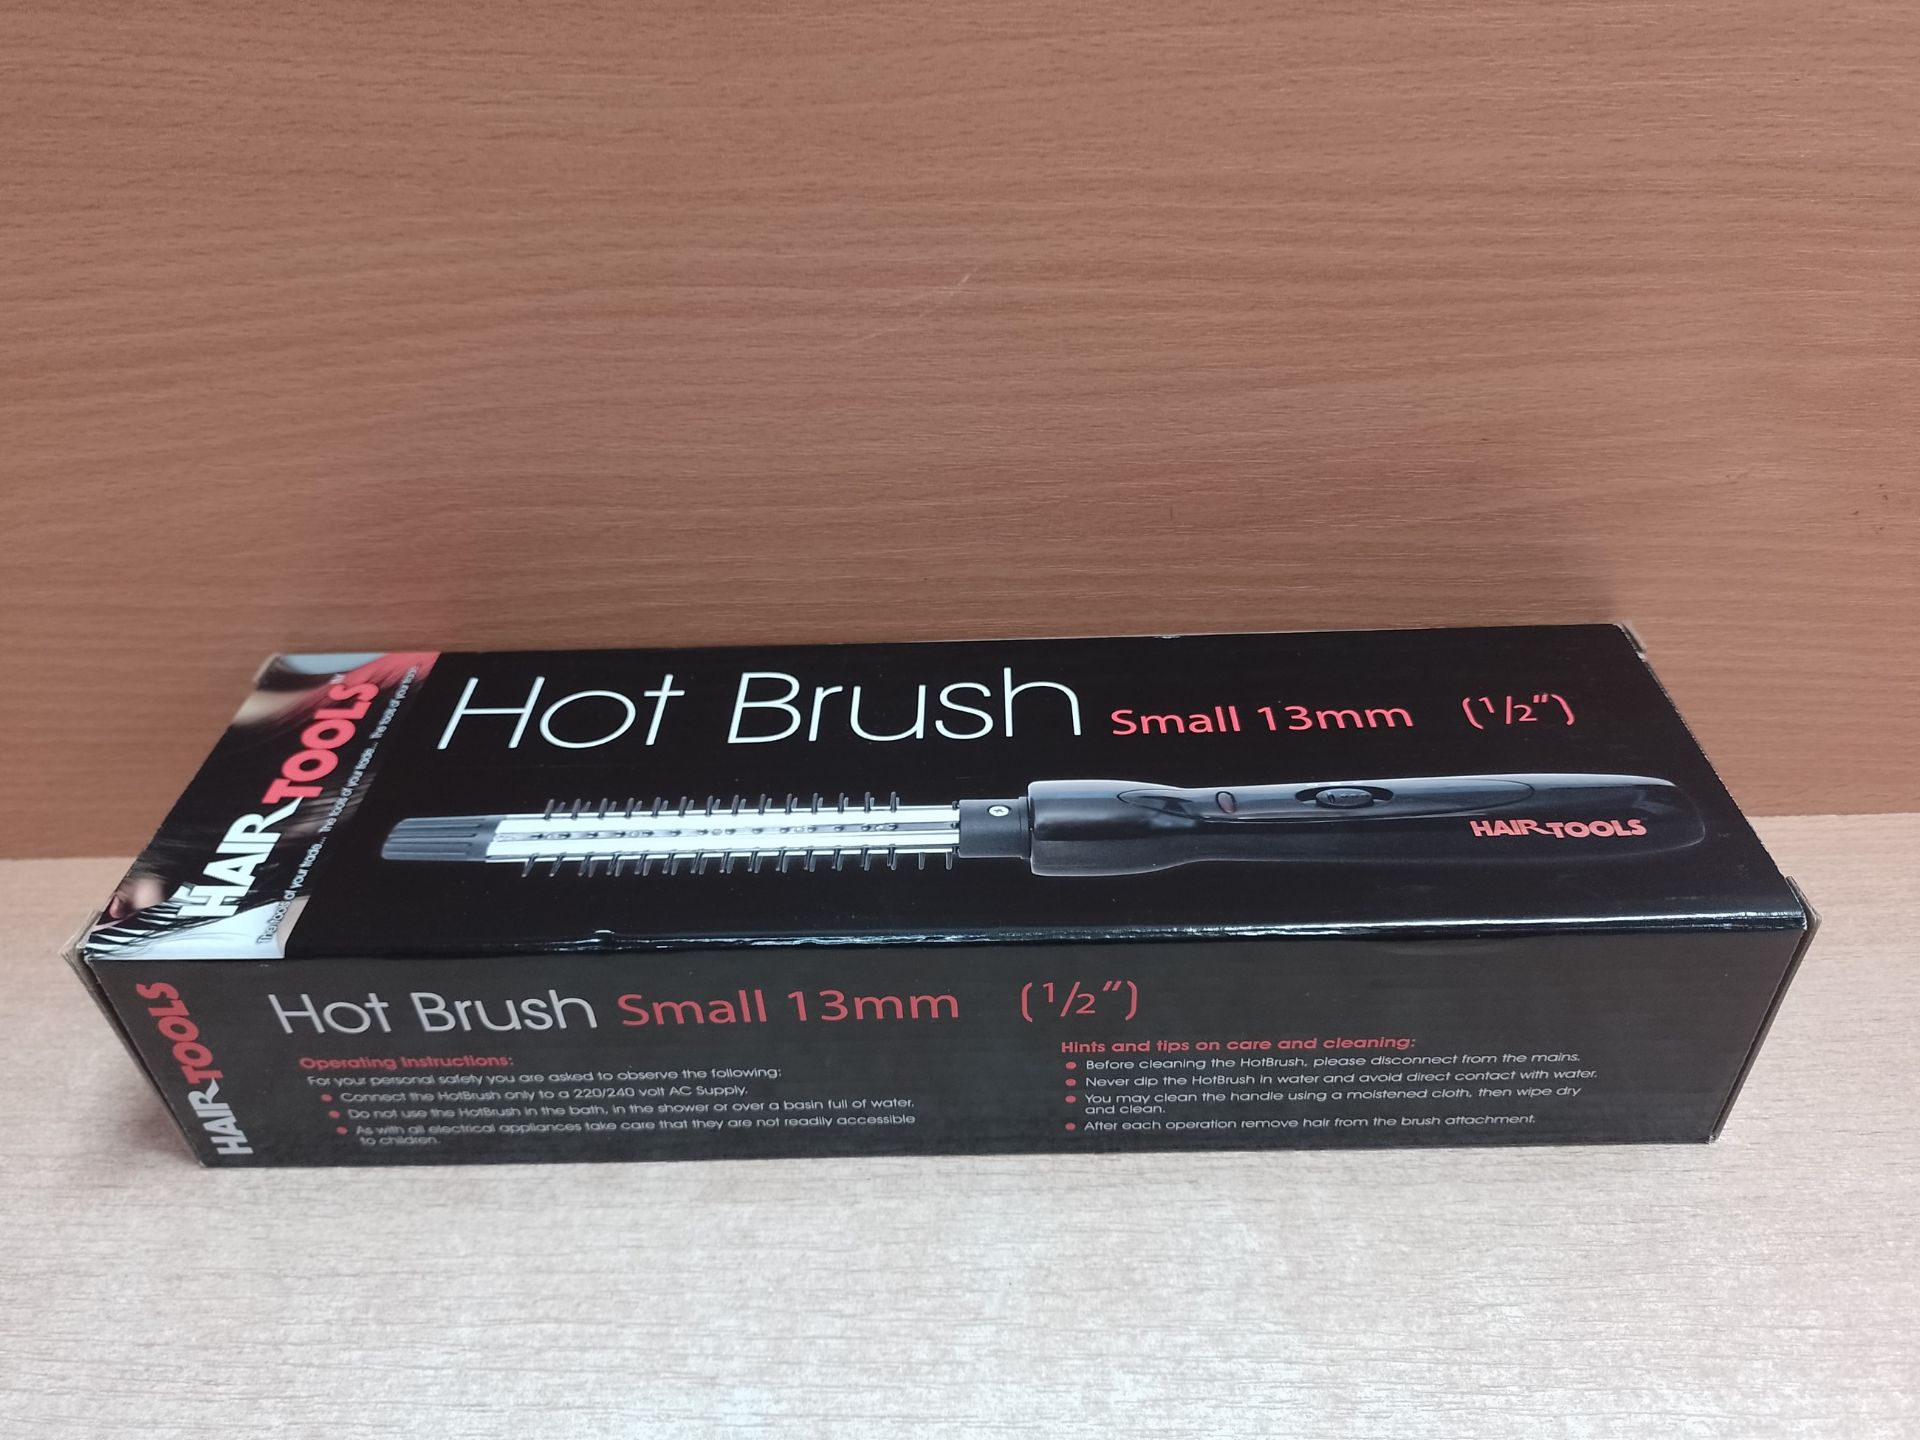 RRP £26.19 Hair Tools Small 13mm Hot Brush. 2 Temperature Electric Curling - Image 2 of 2